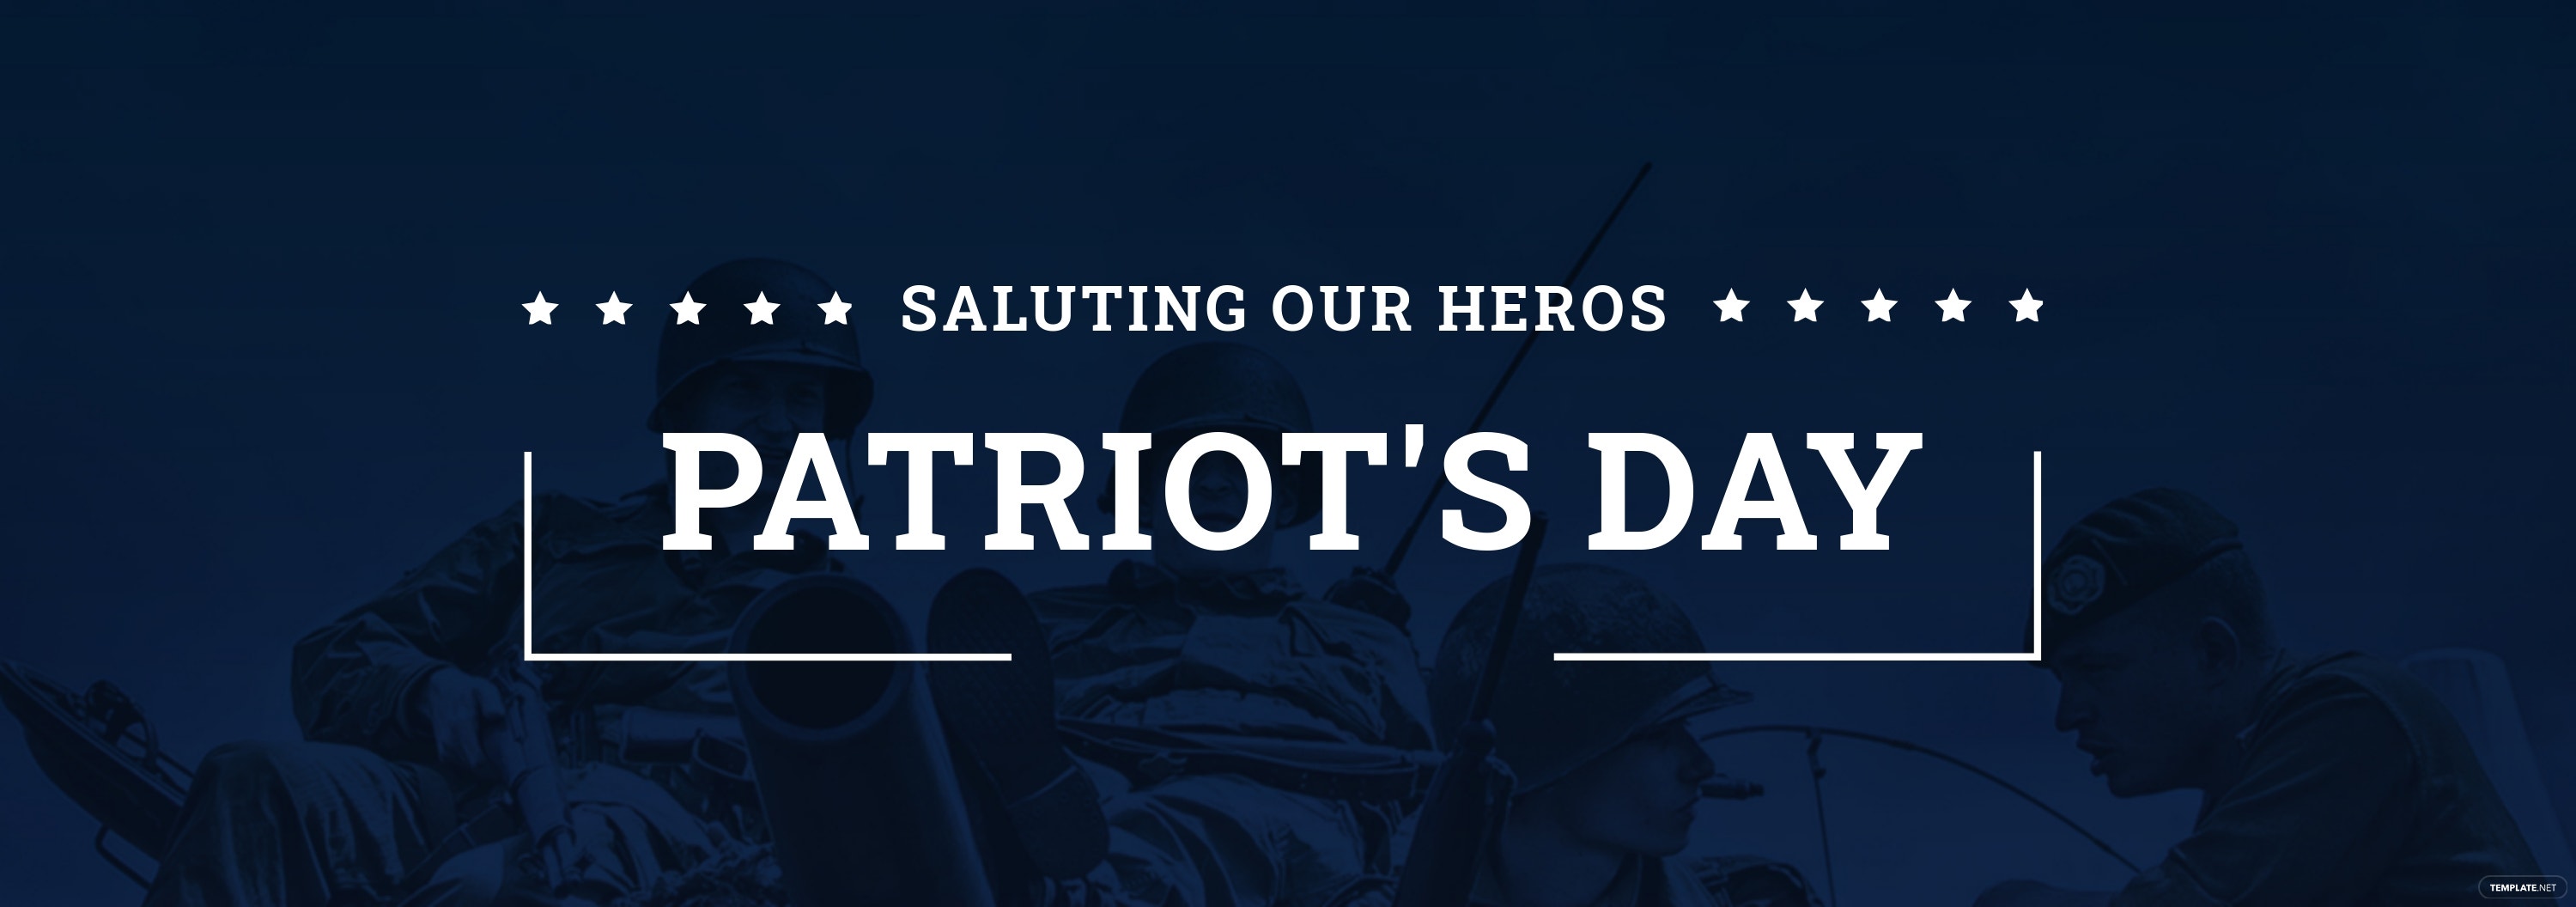 patriots-day-tumblr-banner-template